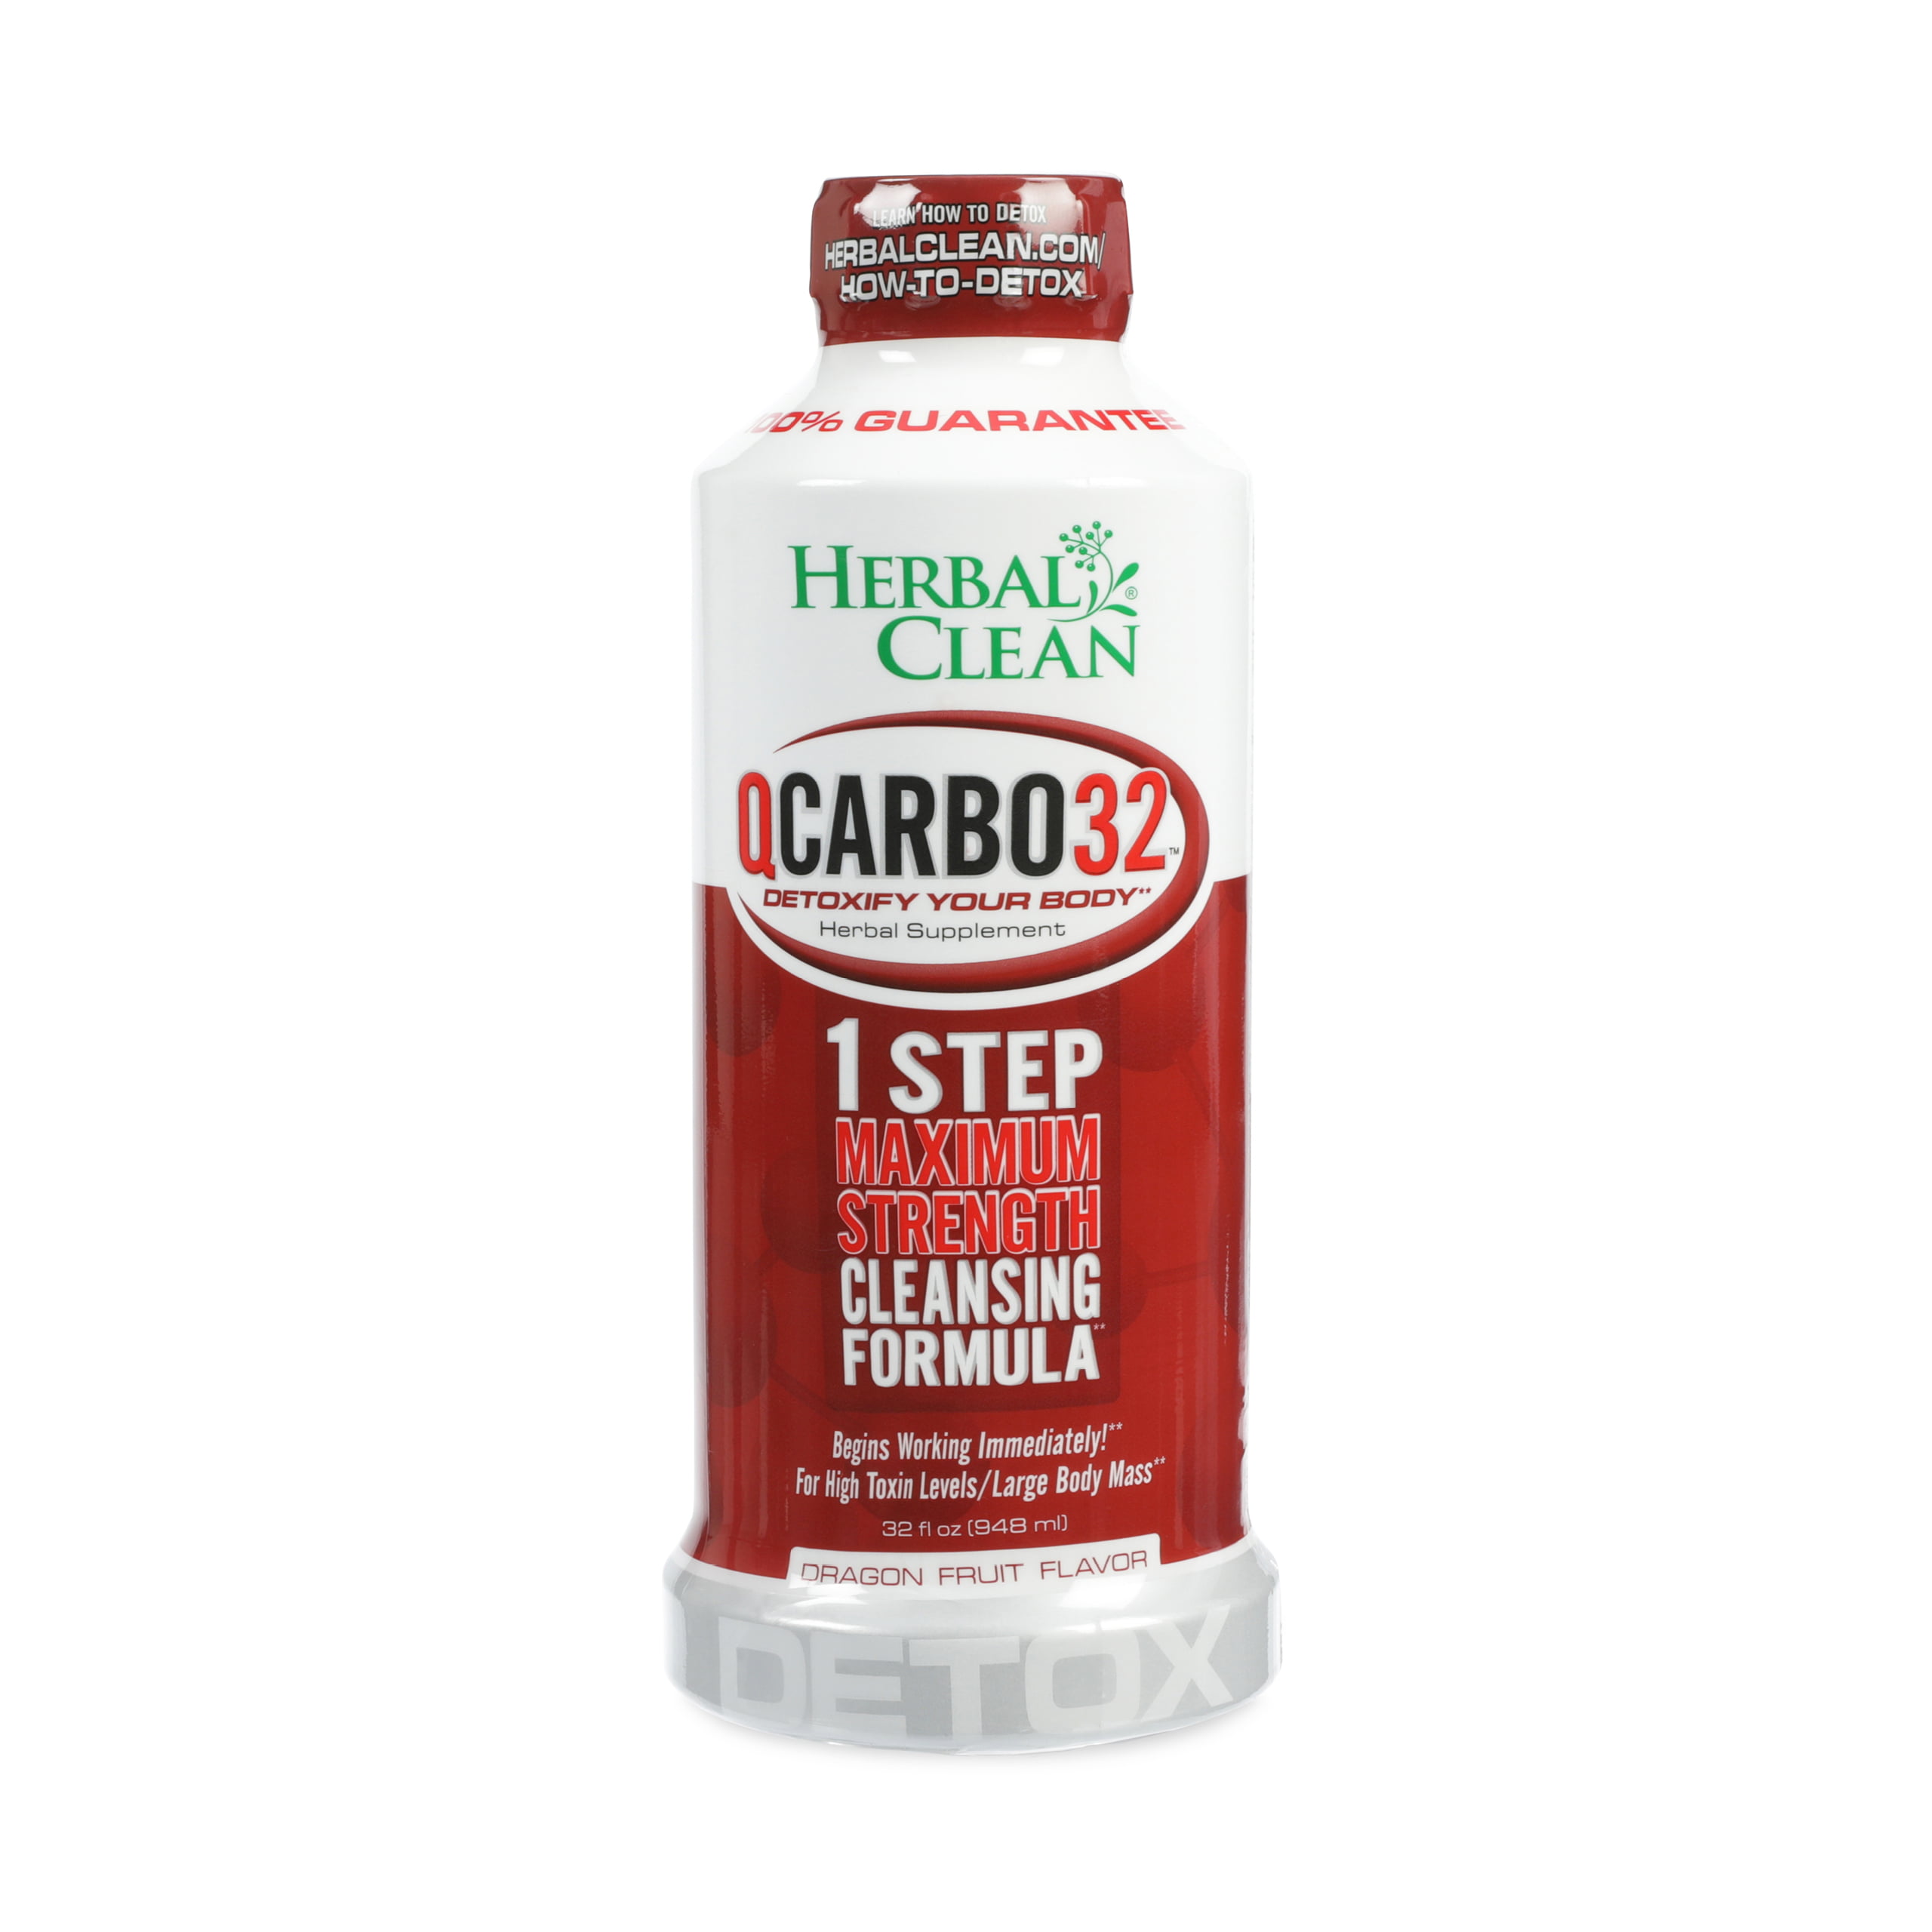 Herbal Clean QCarbo32 is an easy one-step formula for cleanse and.